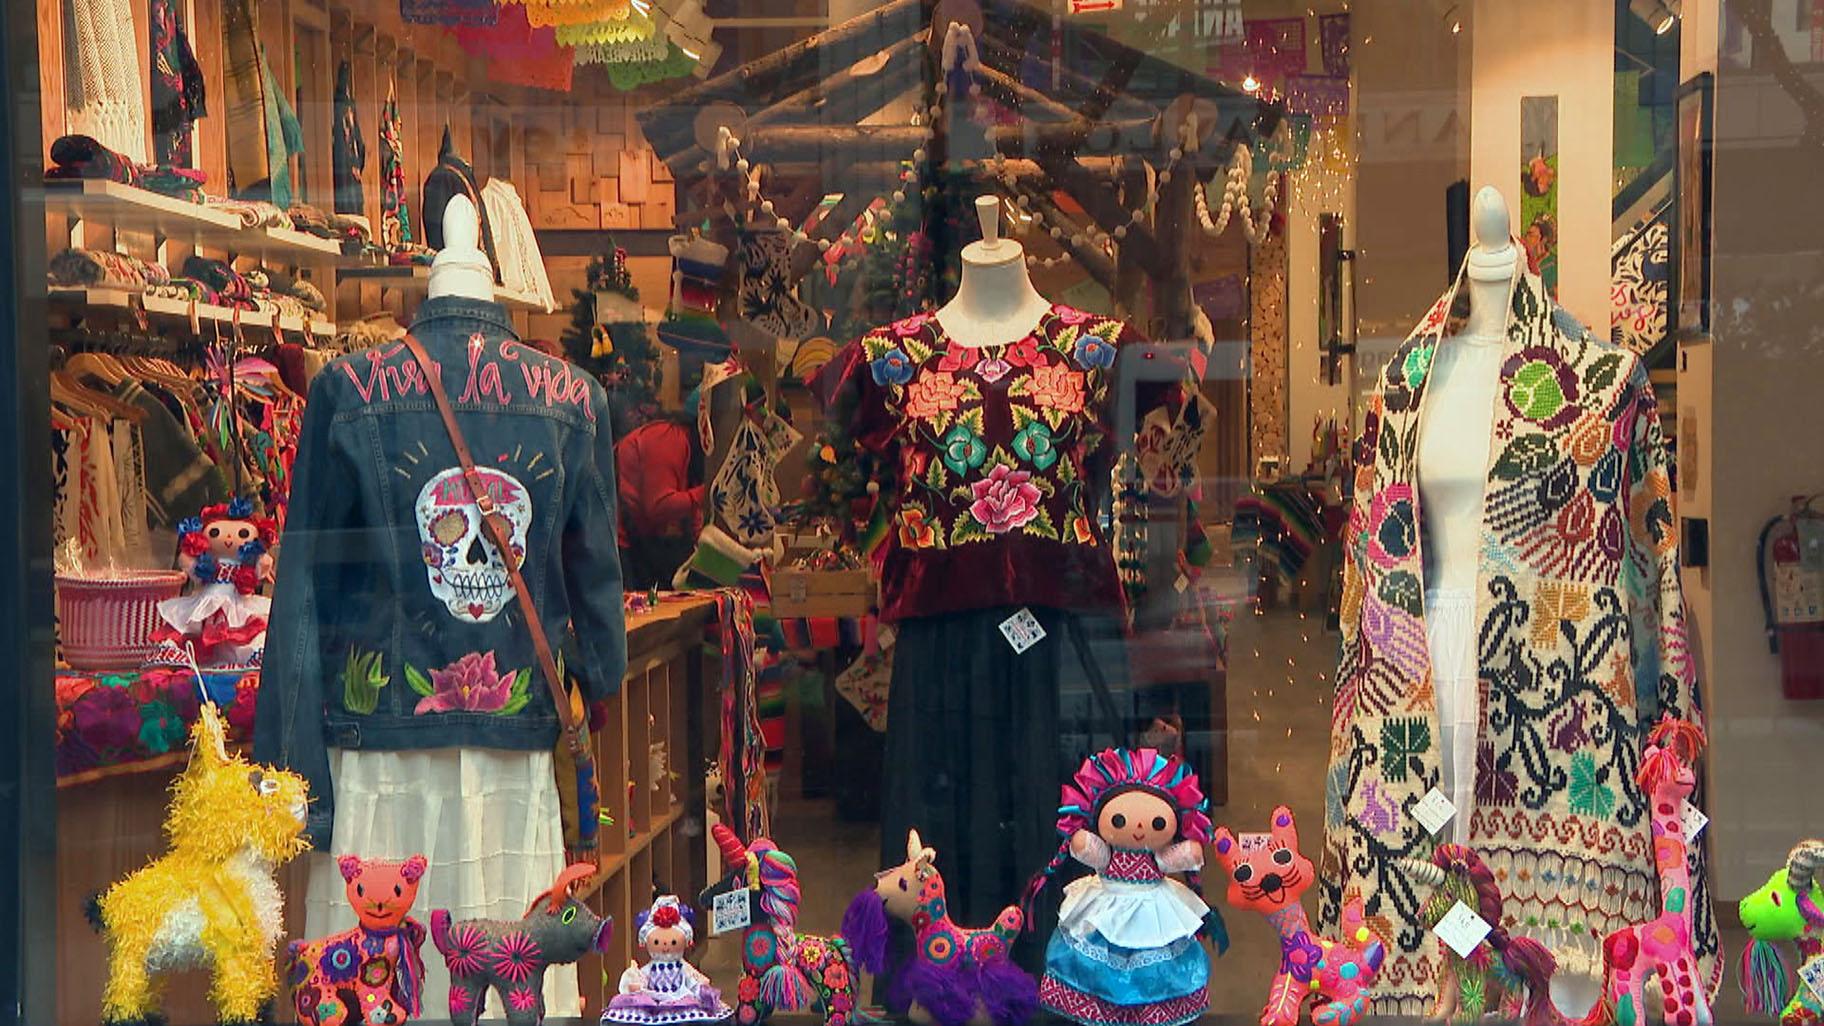 On the Magnificent Mile, Belmont-Cragin small business Colores Mexicanos offers handmade artisan items from states all across Mexico through the end of December. (WTTW News)